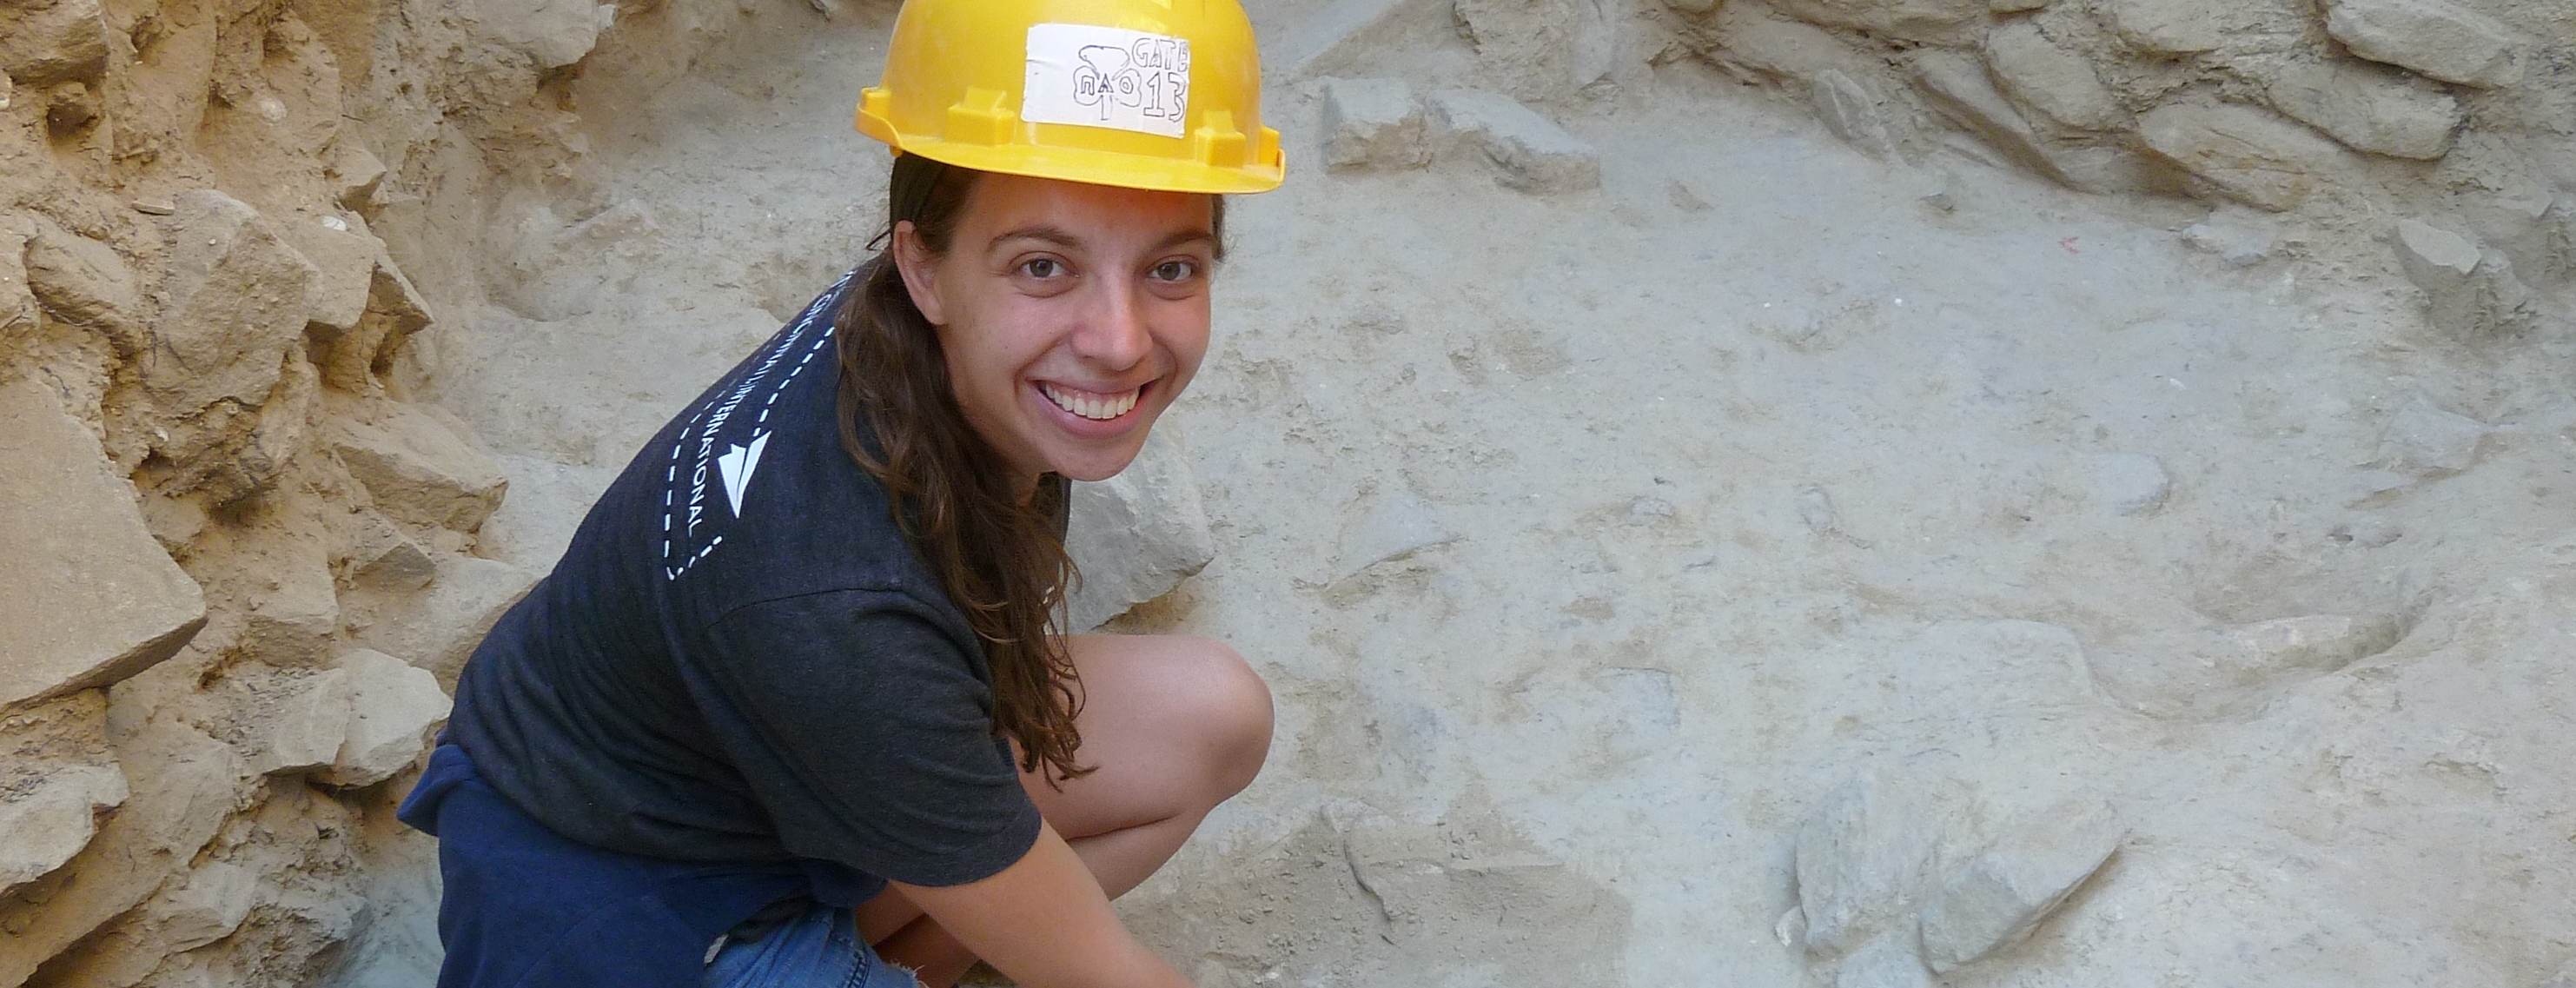 Kerry Ulm, A&S '19, works on an excavation site in Greece